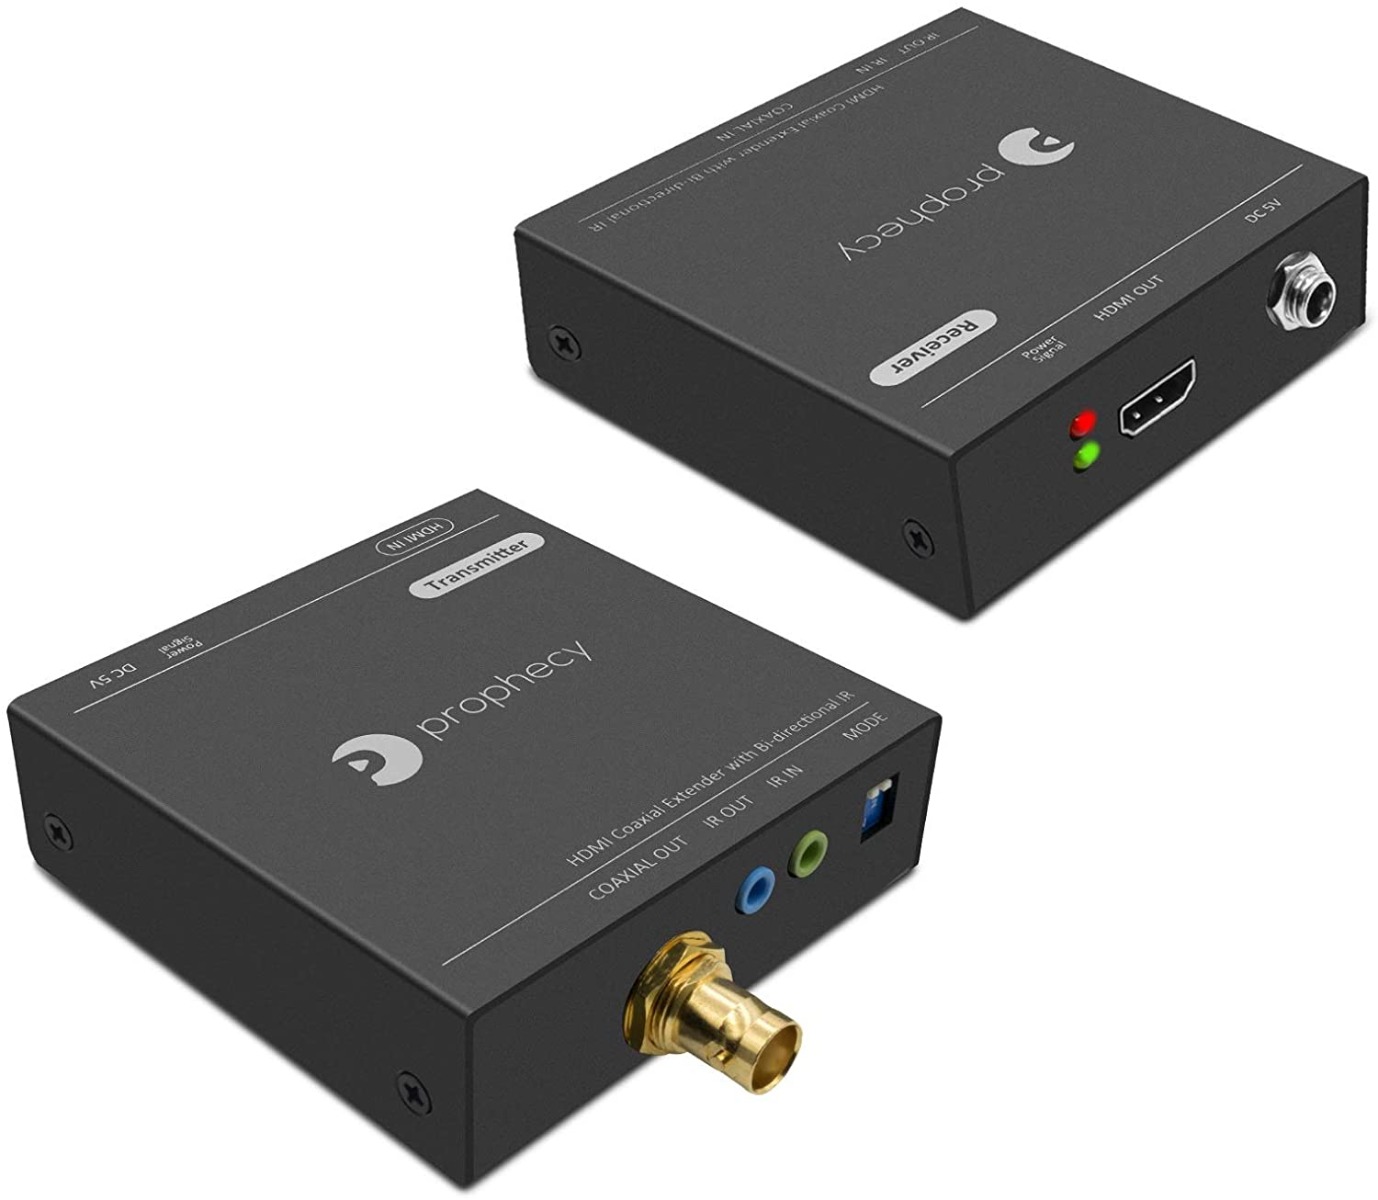 HDMI Extender up to 700m on Coaxial Cable - Audio Video Switch and Splitter  - Audio Video